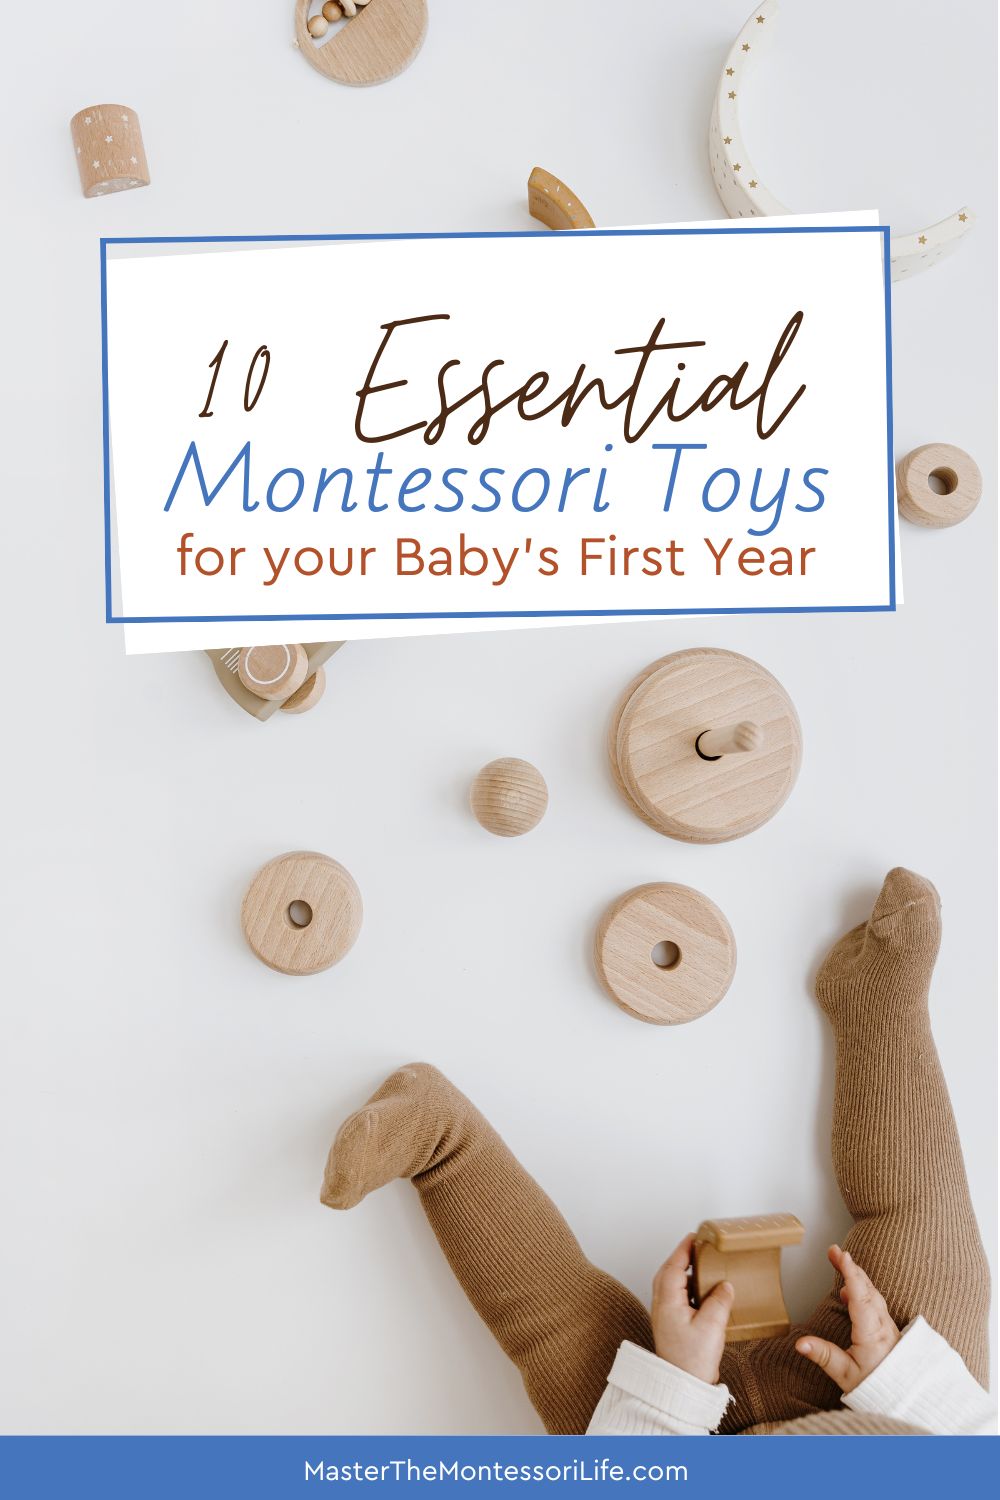 10 Essential Montessori Toys for Your Baby’s First Year